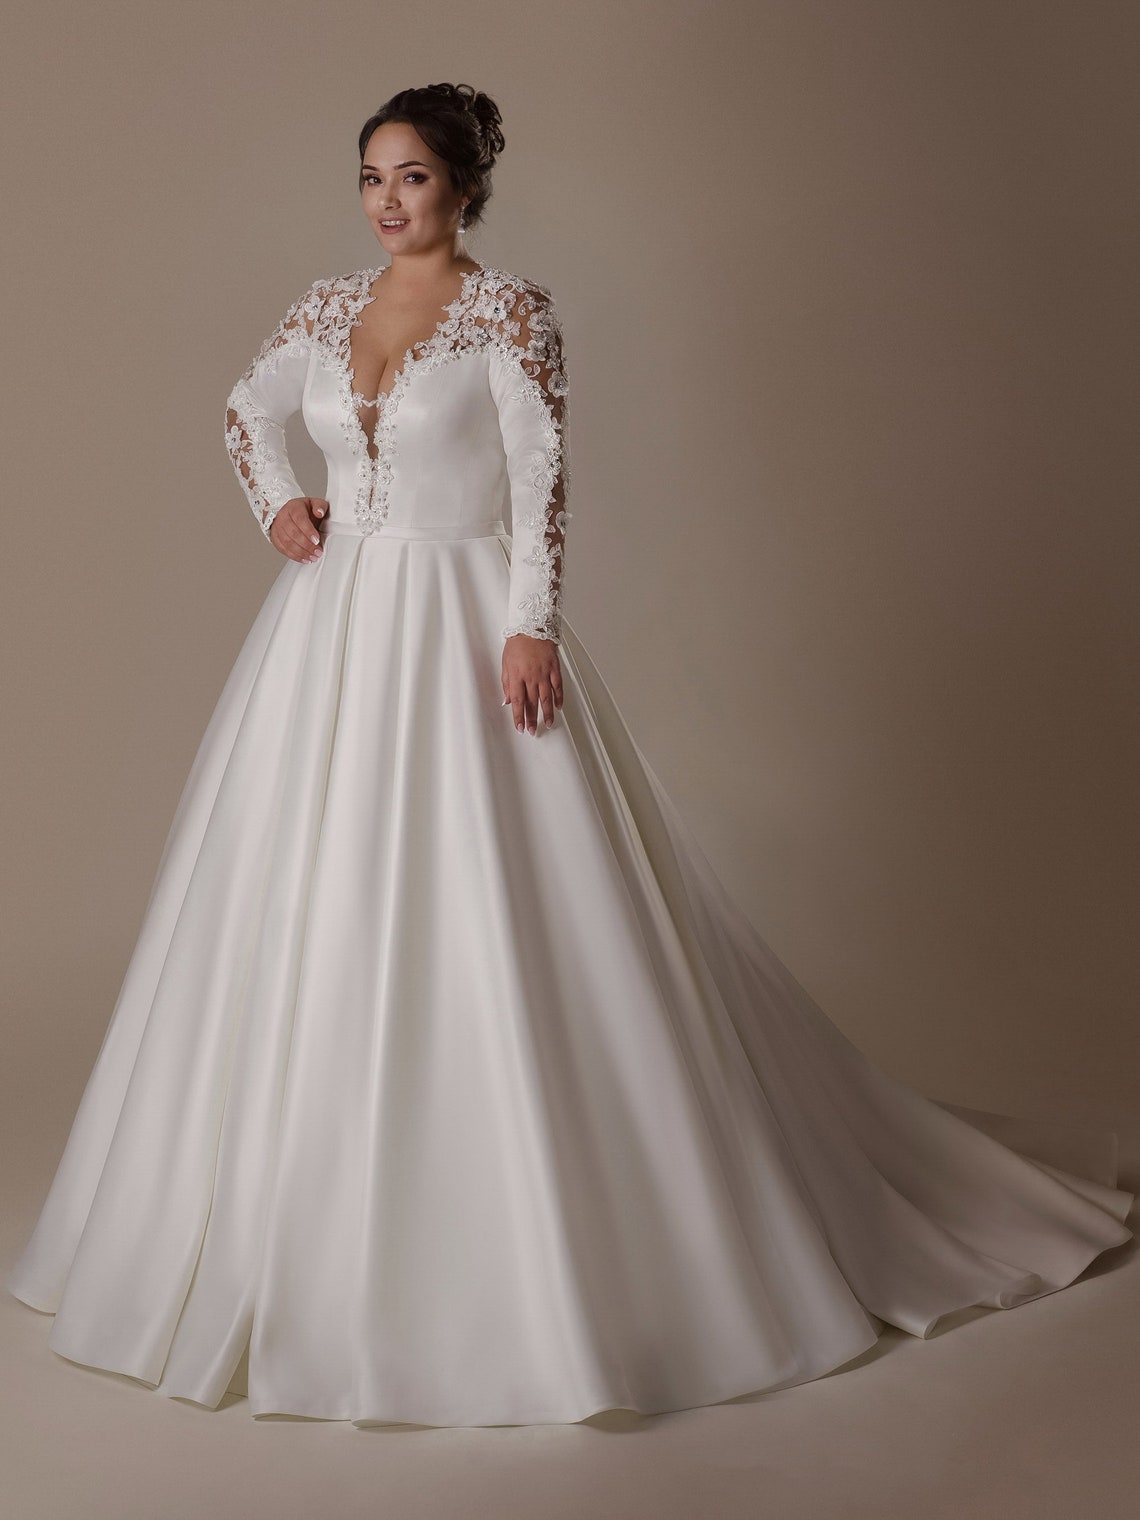 A-Line Gown Dress With Sleeves And Long Train Lace Wedding image 2